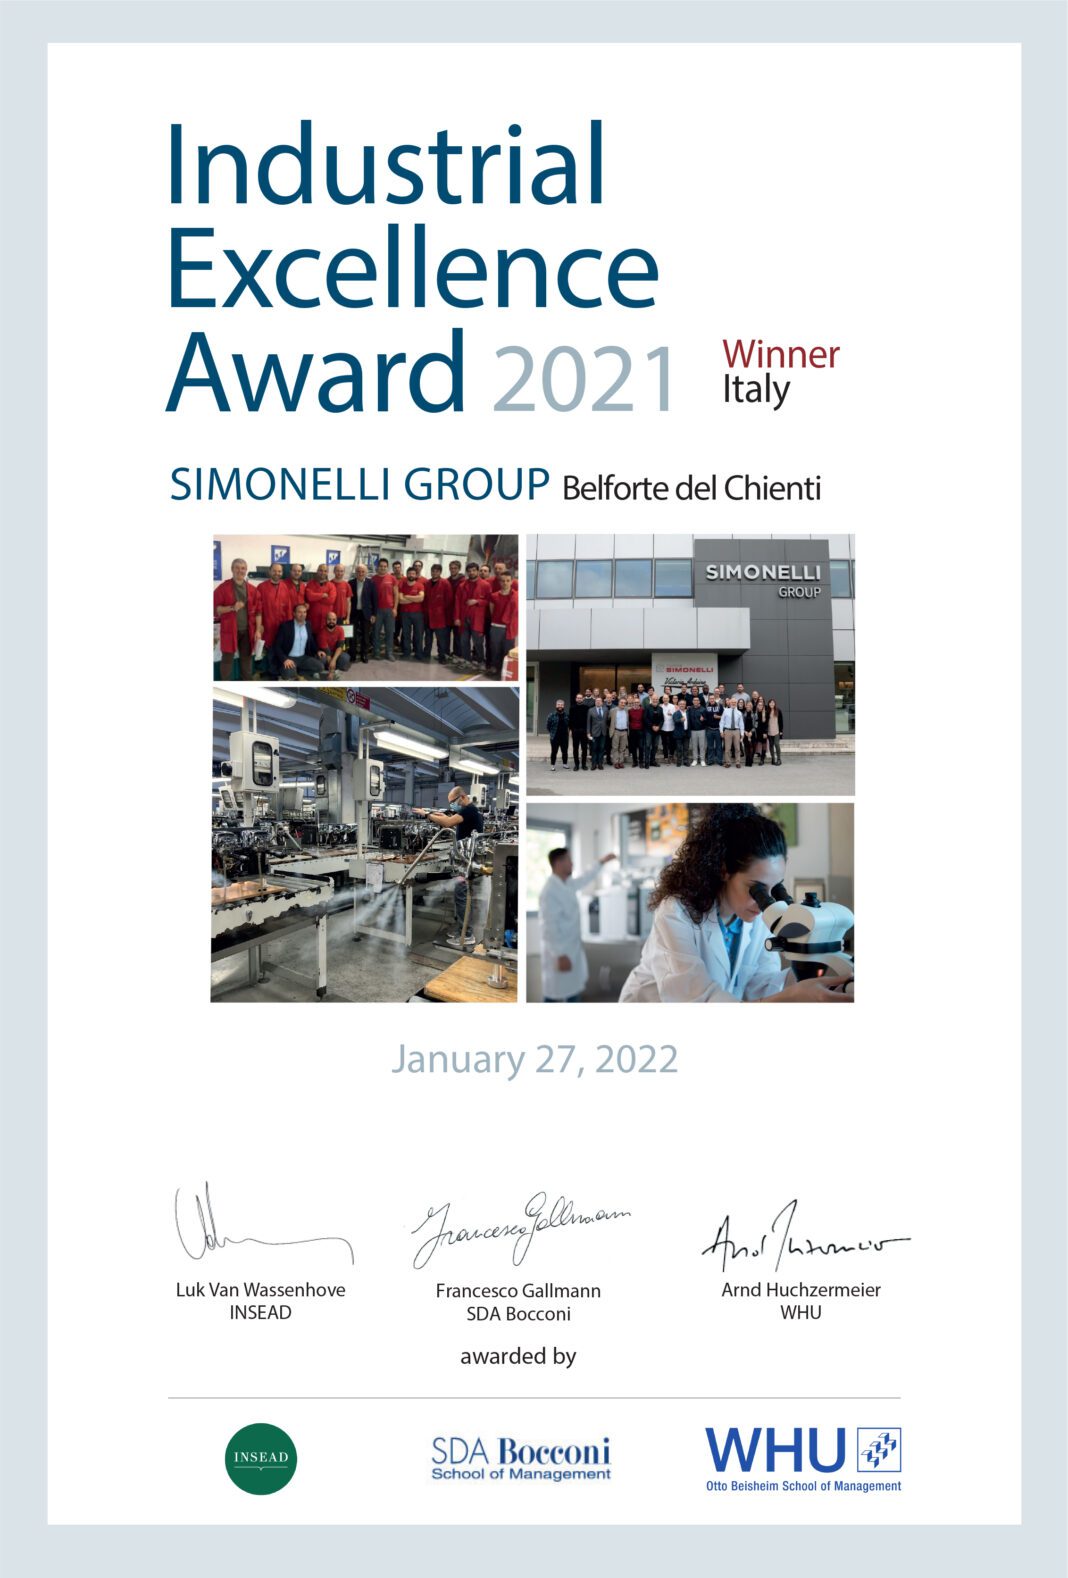 Simonelli Group won the 2021 Excellence Industry Award